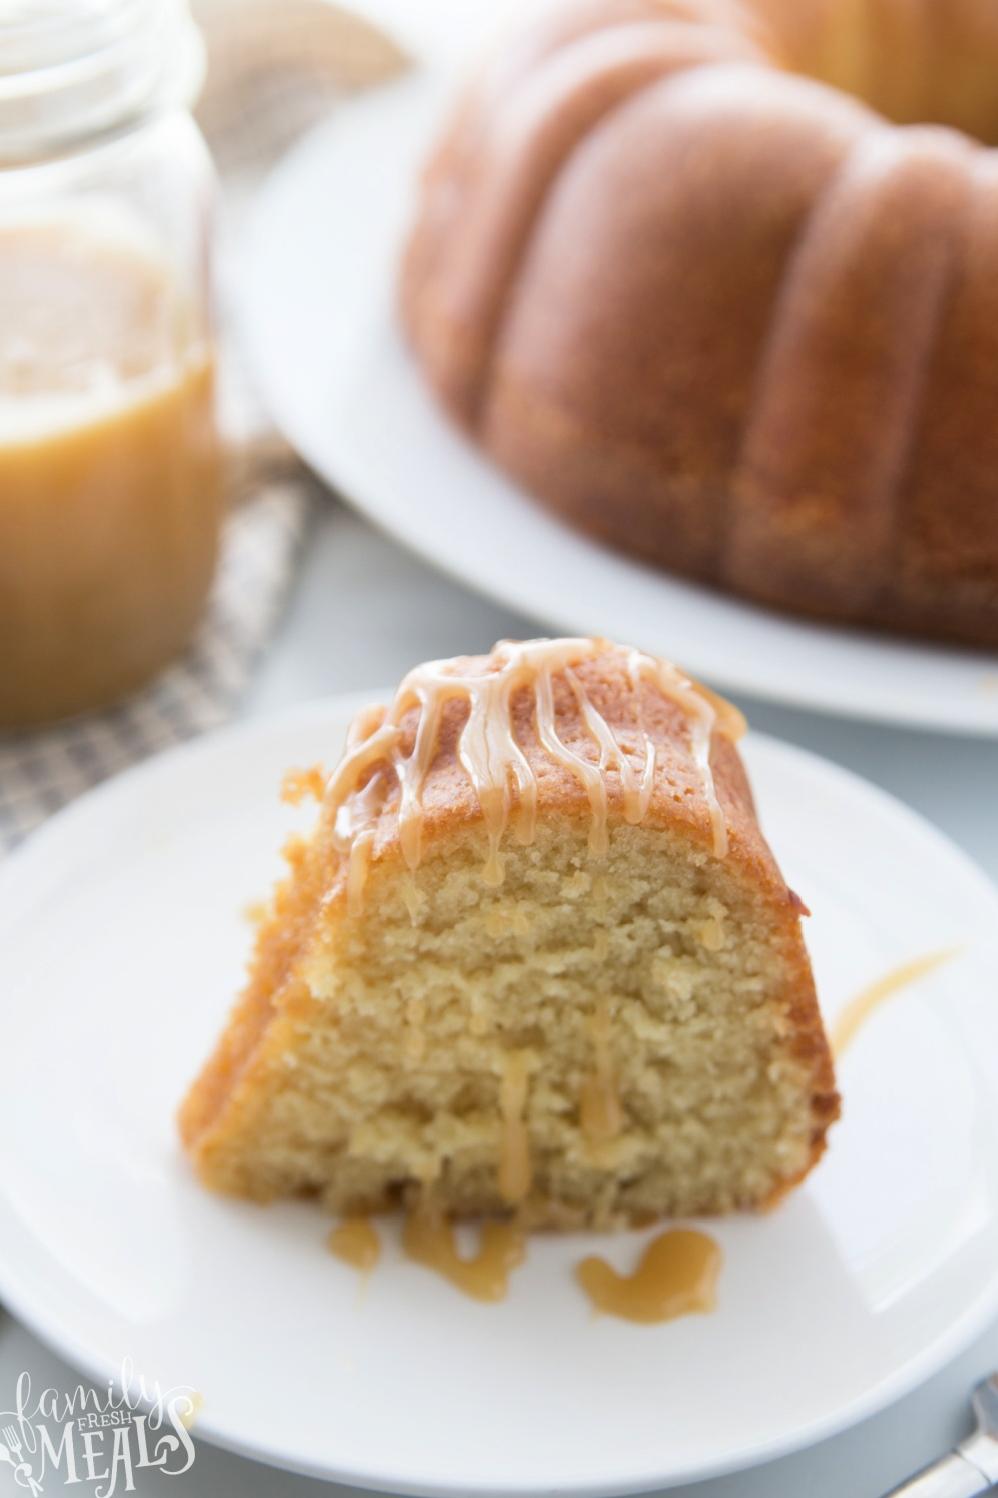  The sweet aroma of amaretto filling the air as the pound cake grills